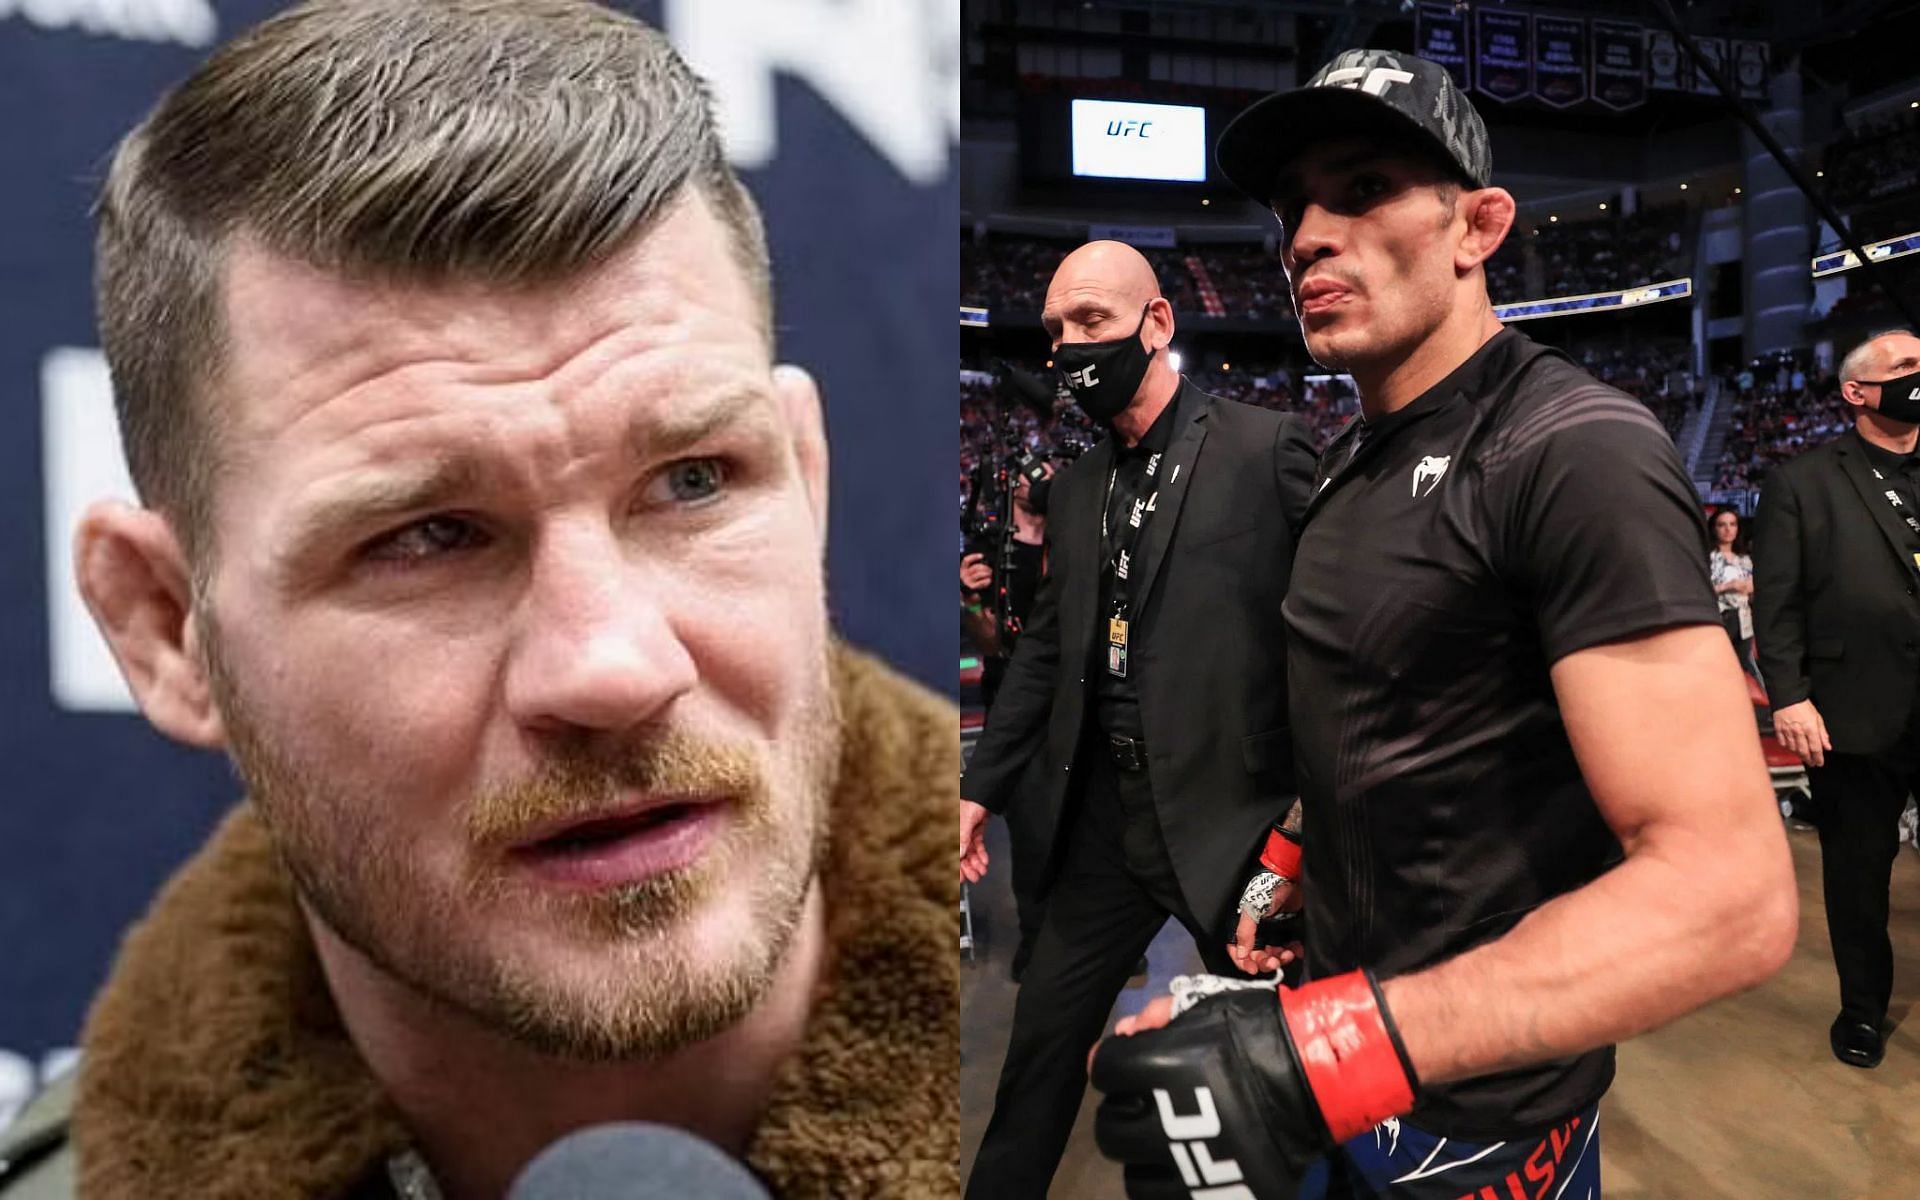 Michael Bisping (left) and Tony Ferguson (right)